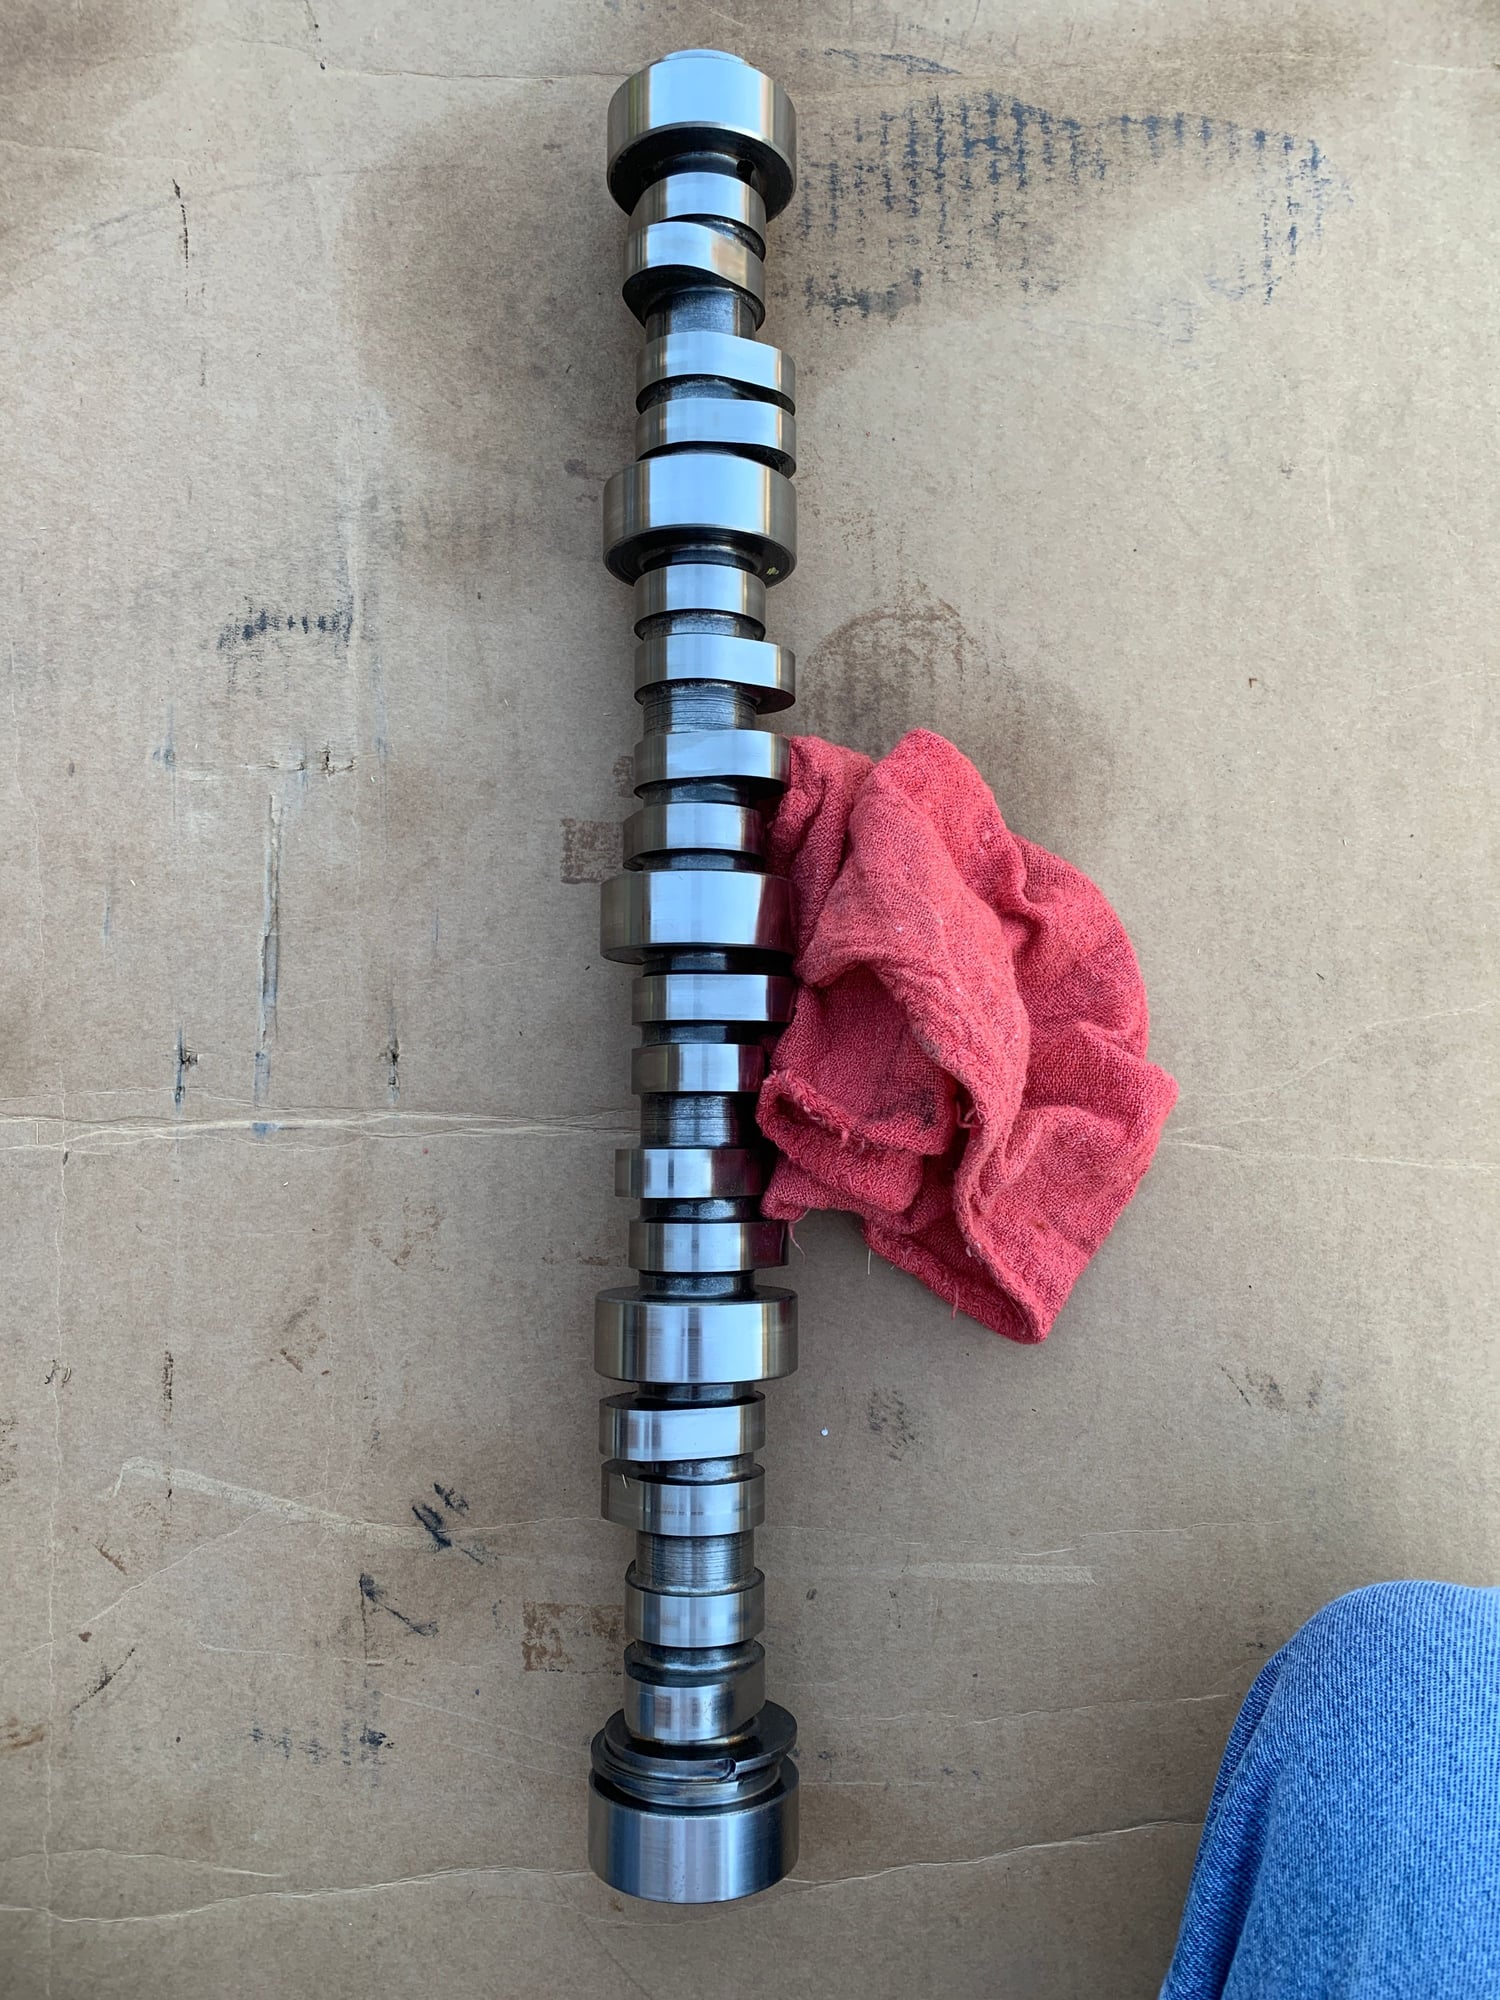 Engine - Internals - Rollmaster double roller for sale - Used - Aurora, IL 60502, United States